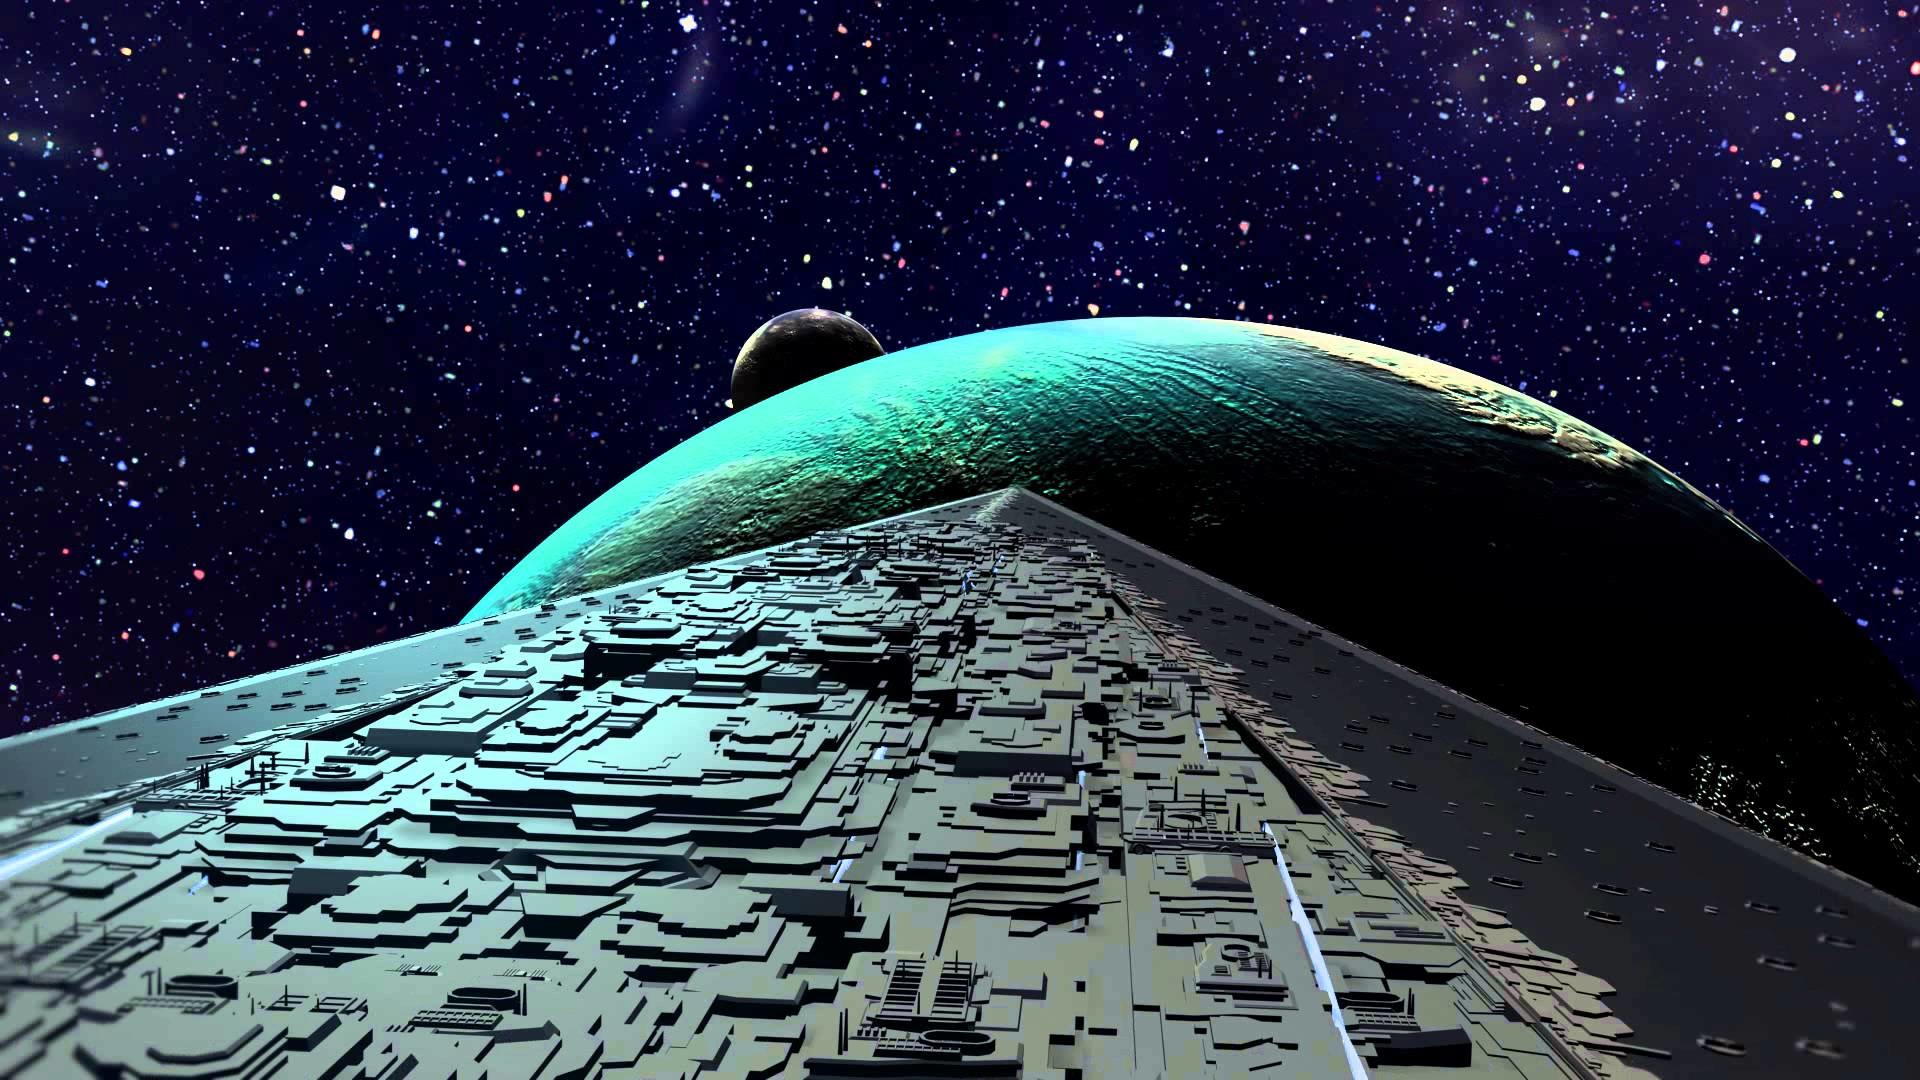 1920x1080 [3DS Max] Super Star Destroyer : Executor - YouTube